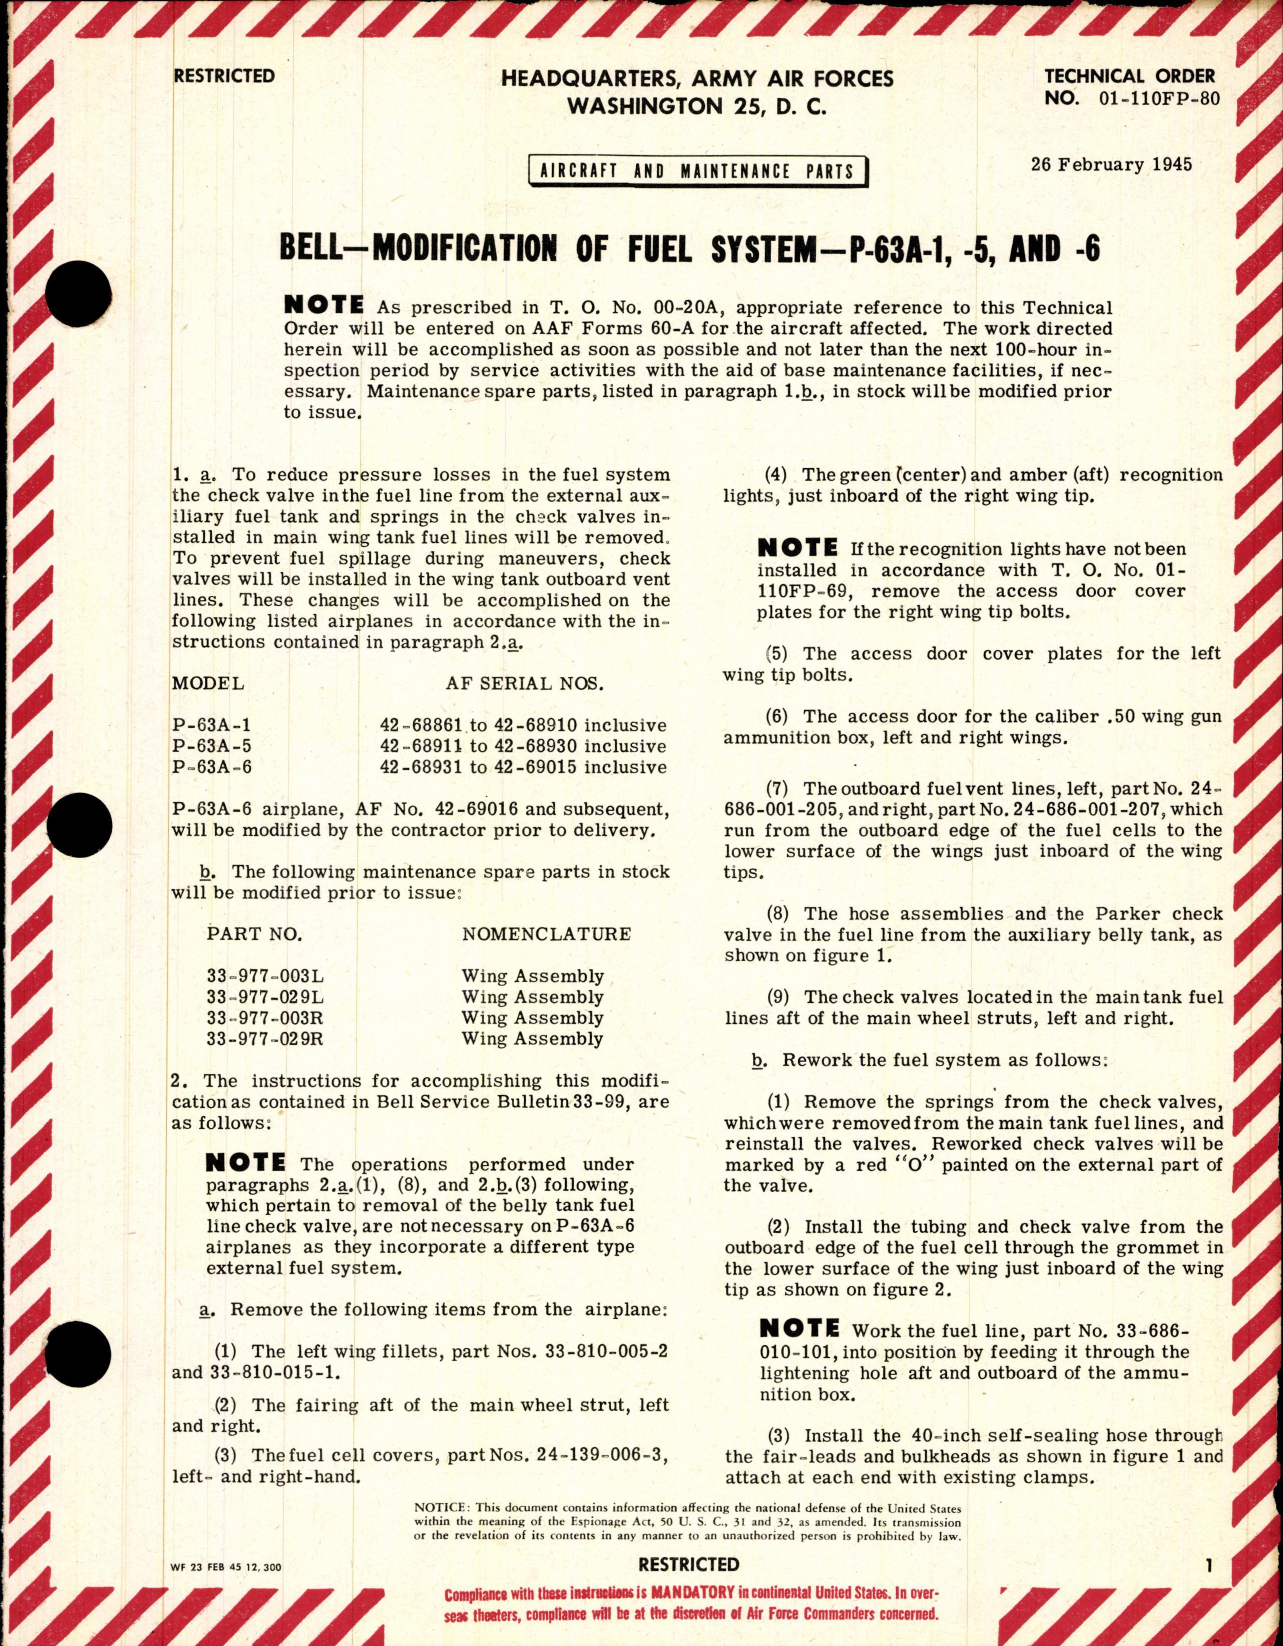 Sample page 1 from AirCorps Library document: Modification of Fuel System for P-63